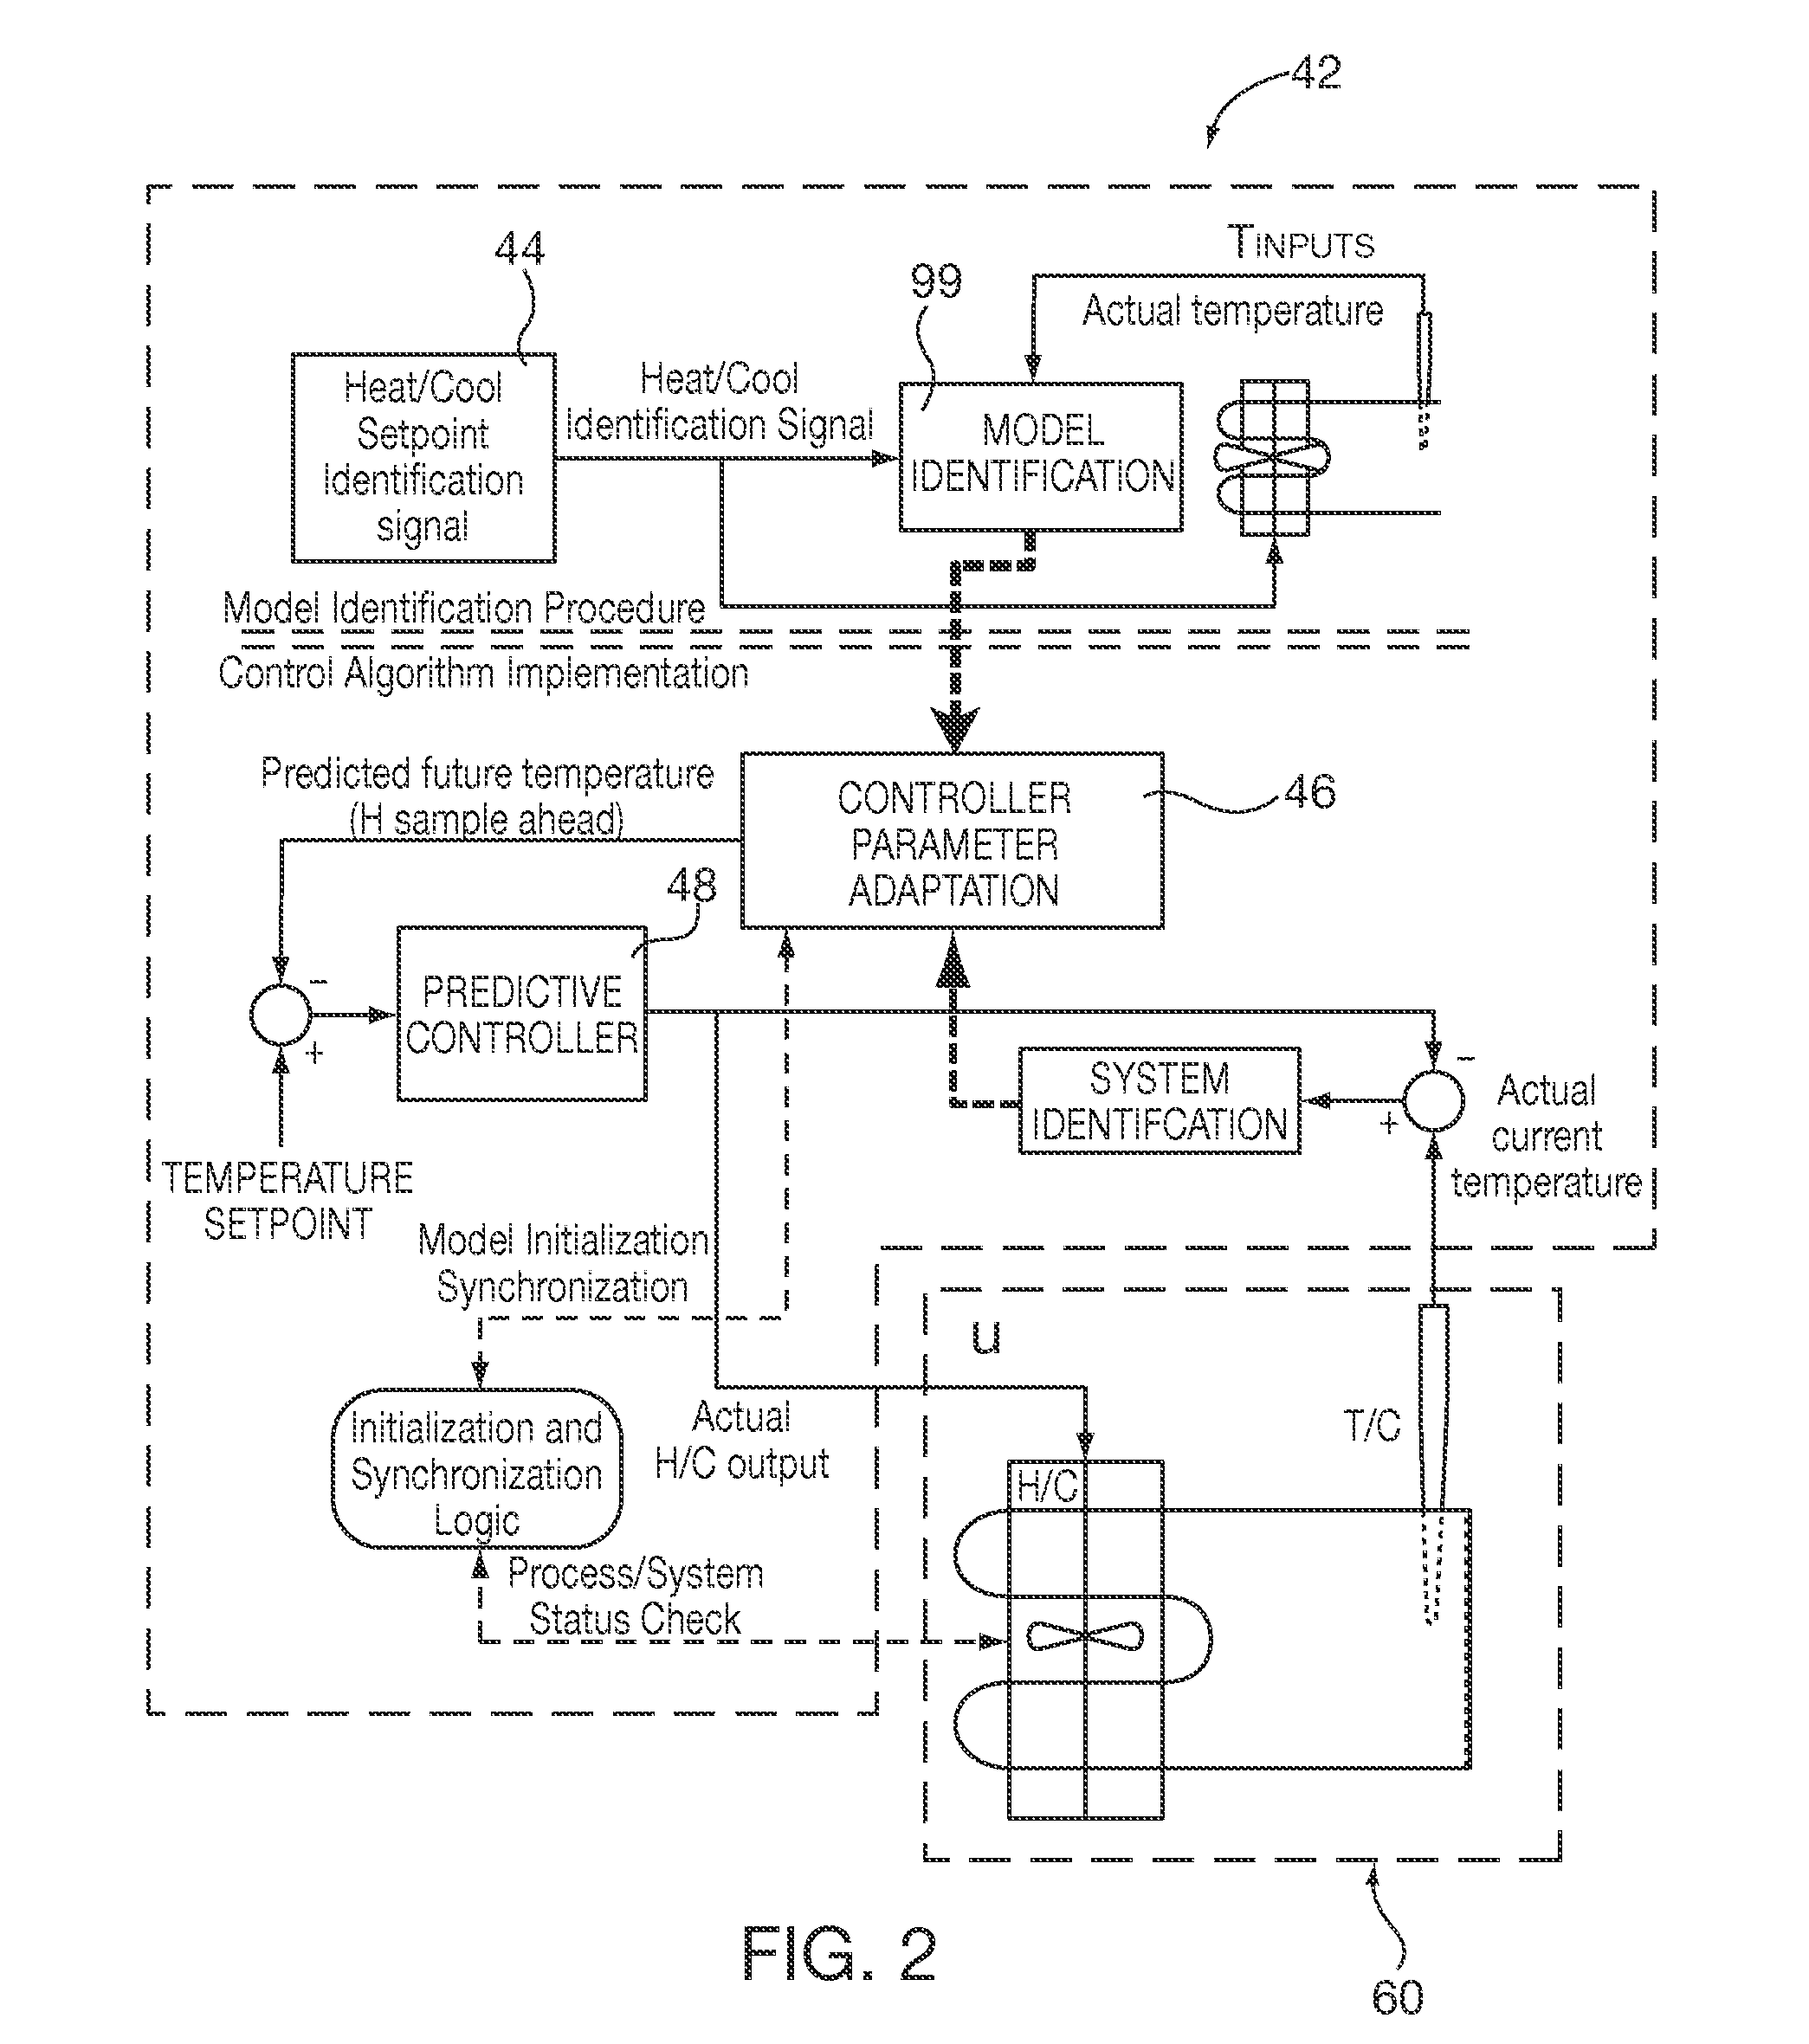 Method and apparatus of a self-configured, model-based adaptive, predictive controller for multi-zone regulation systems